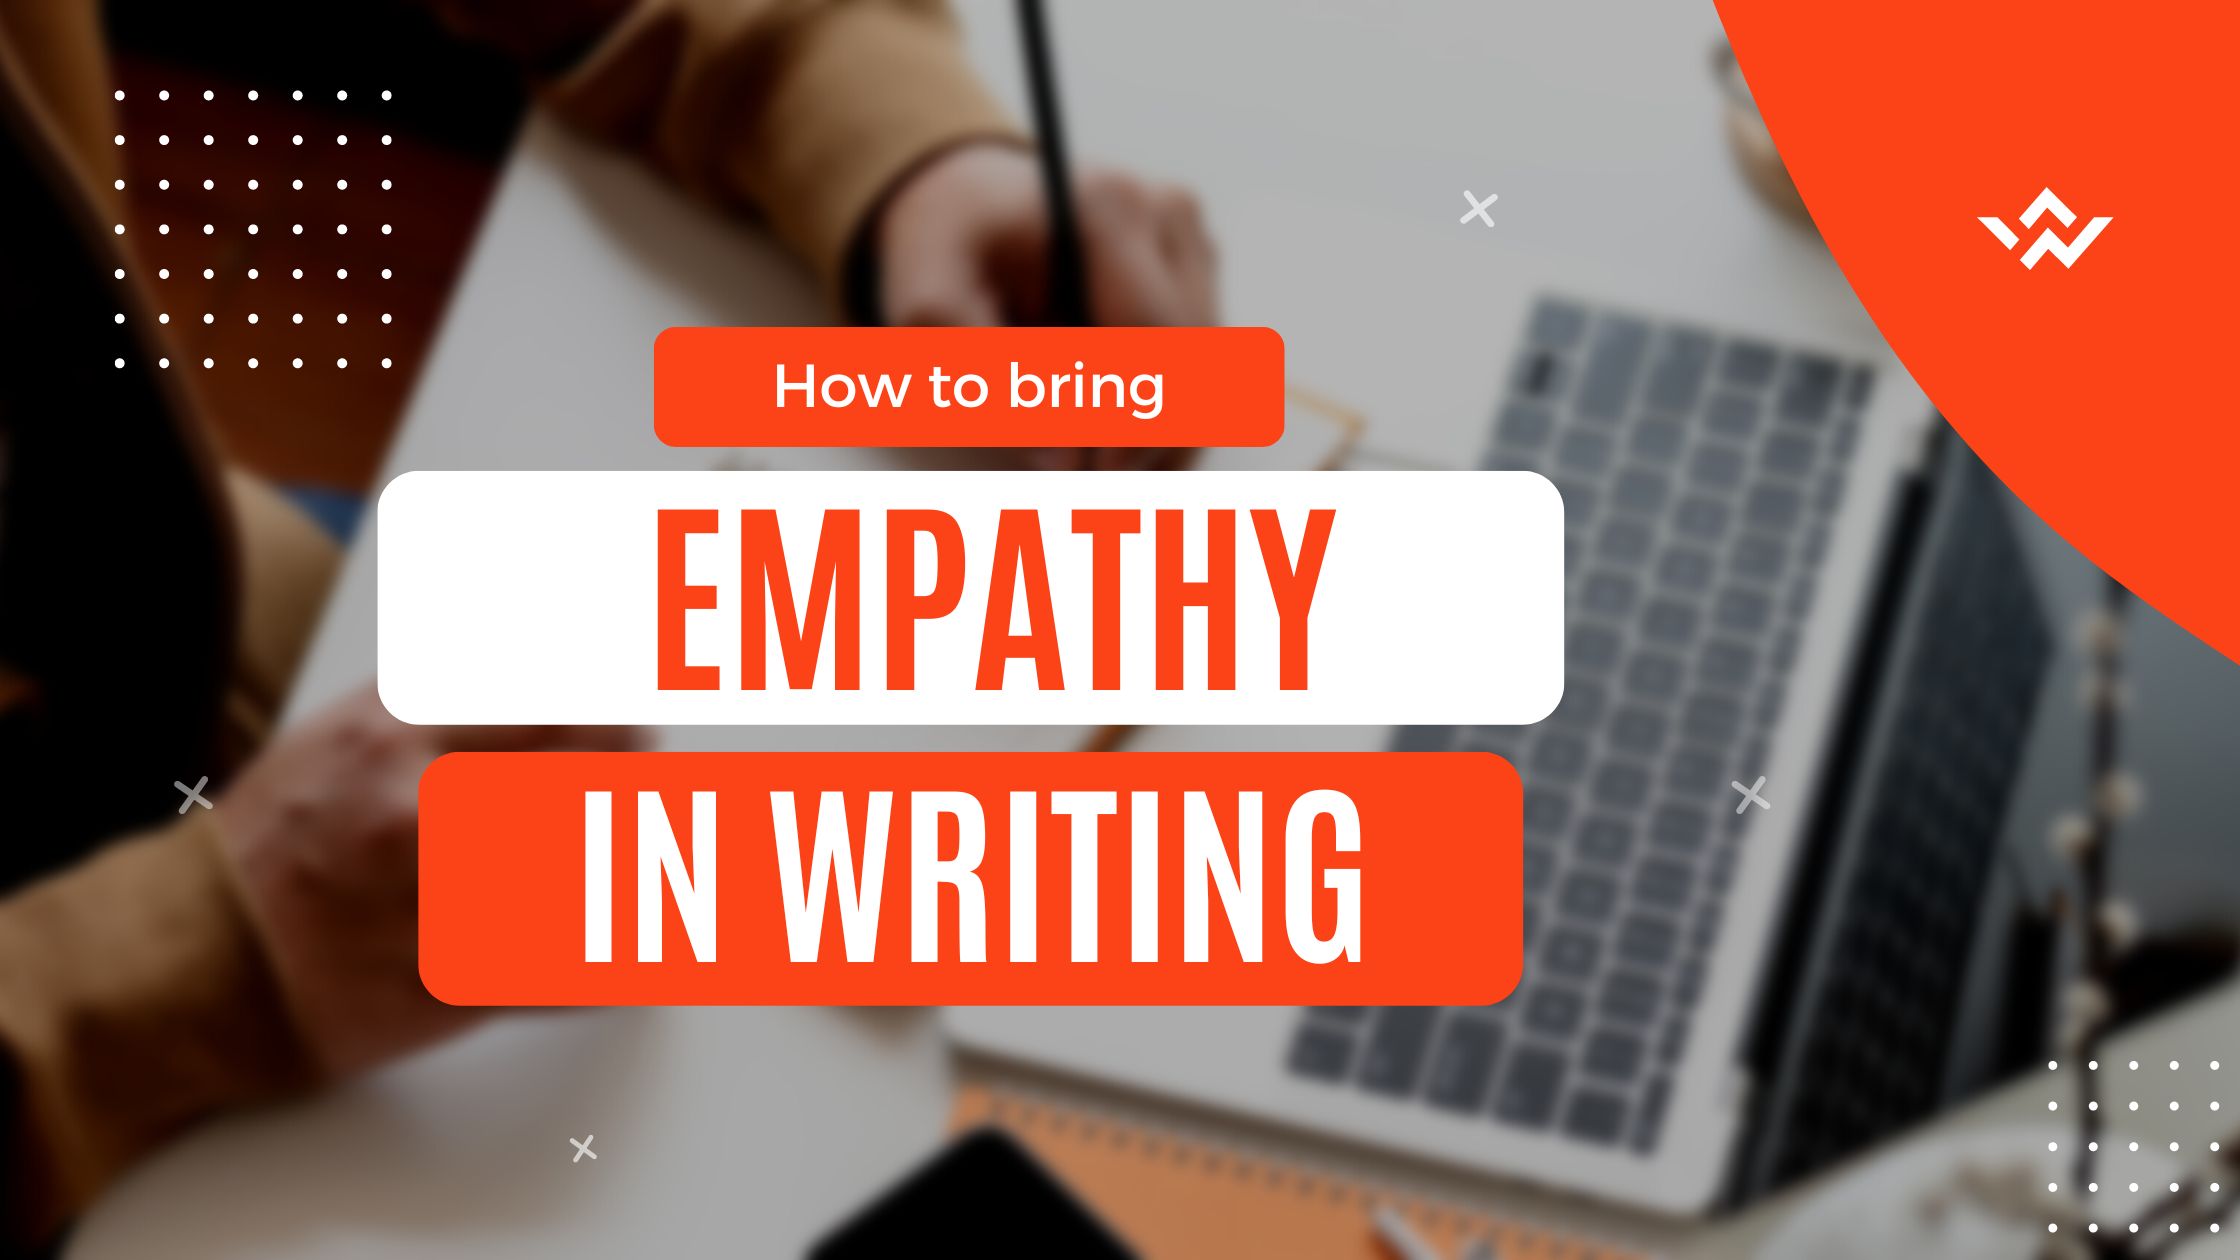 How to bring empathy in writing